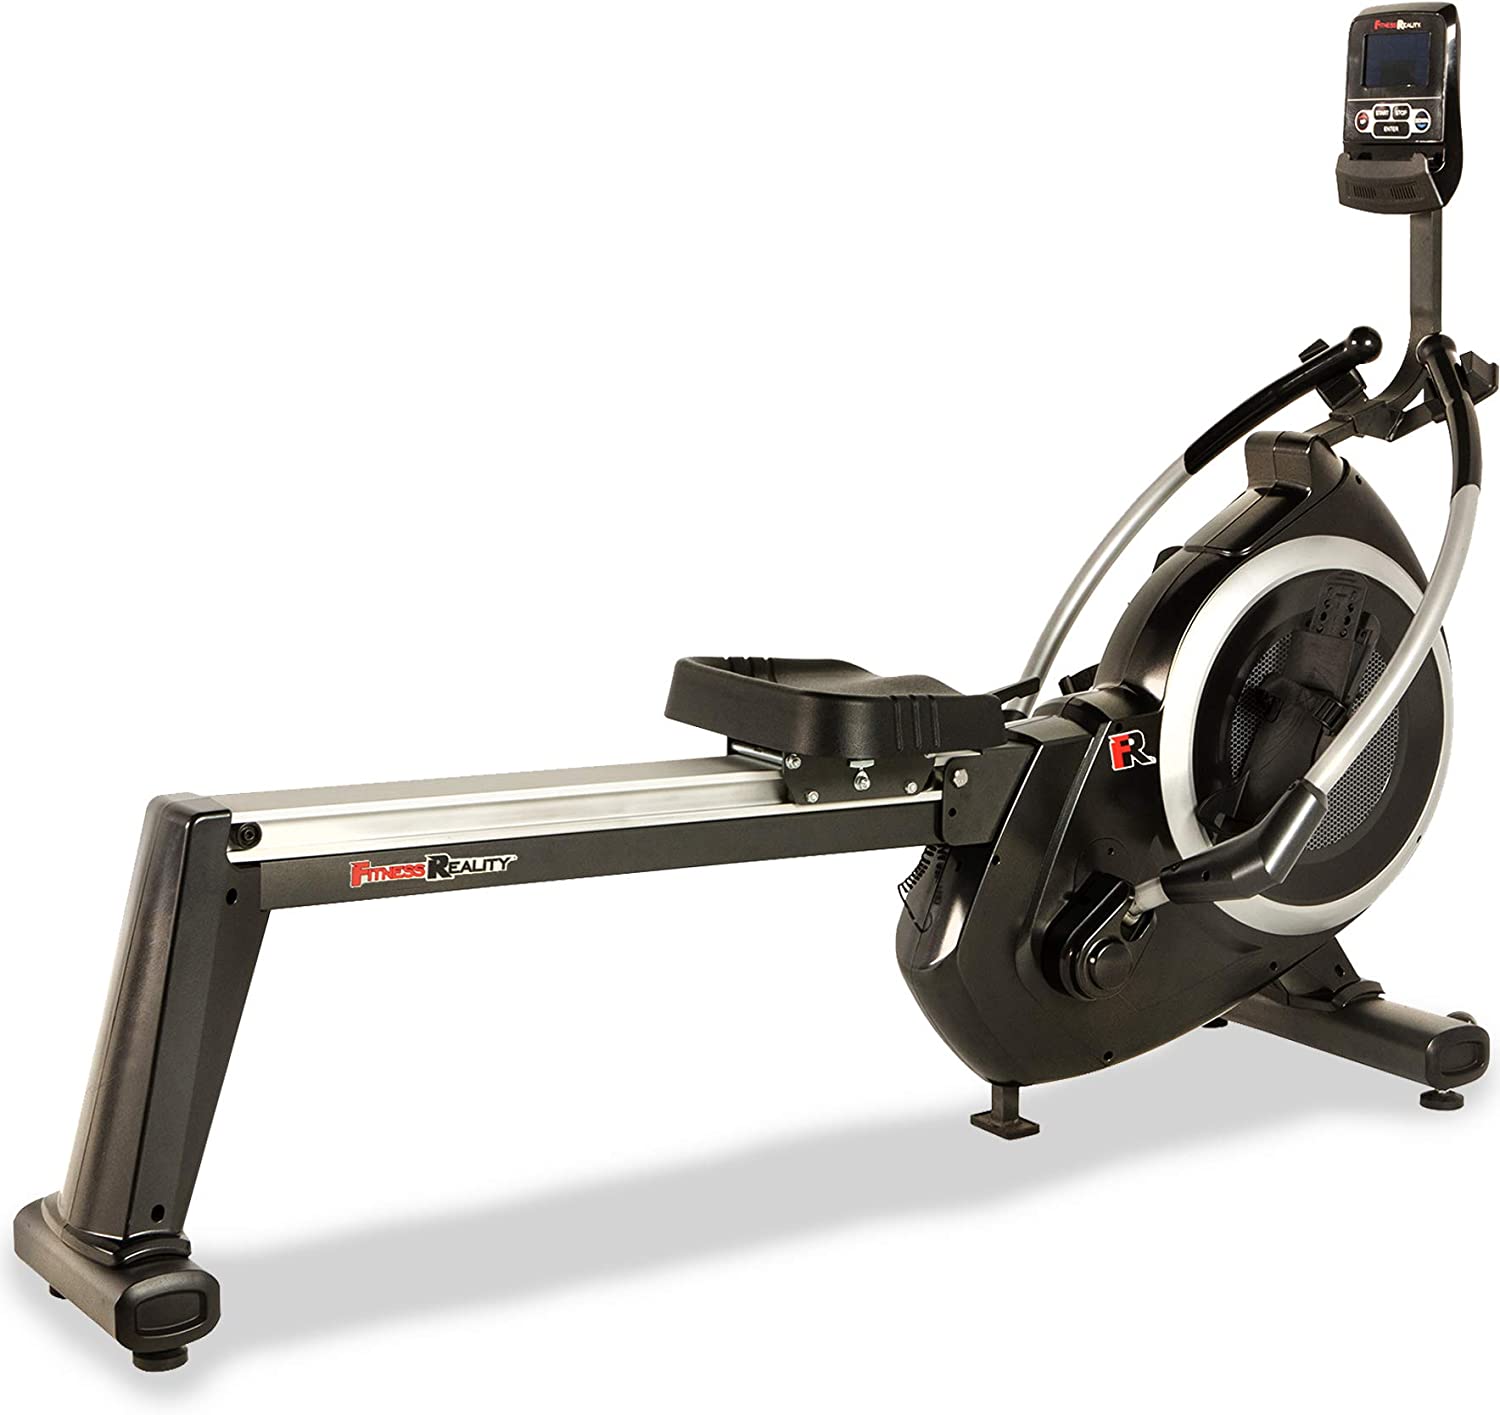 Save $350 on this Fitness Reality 4000MR Magnetic Rower for Prime